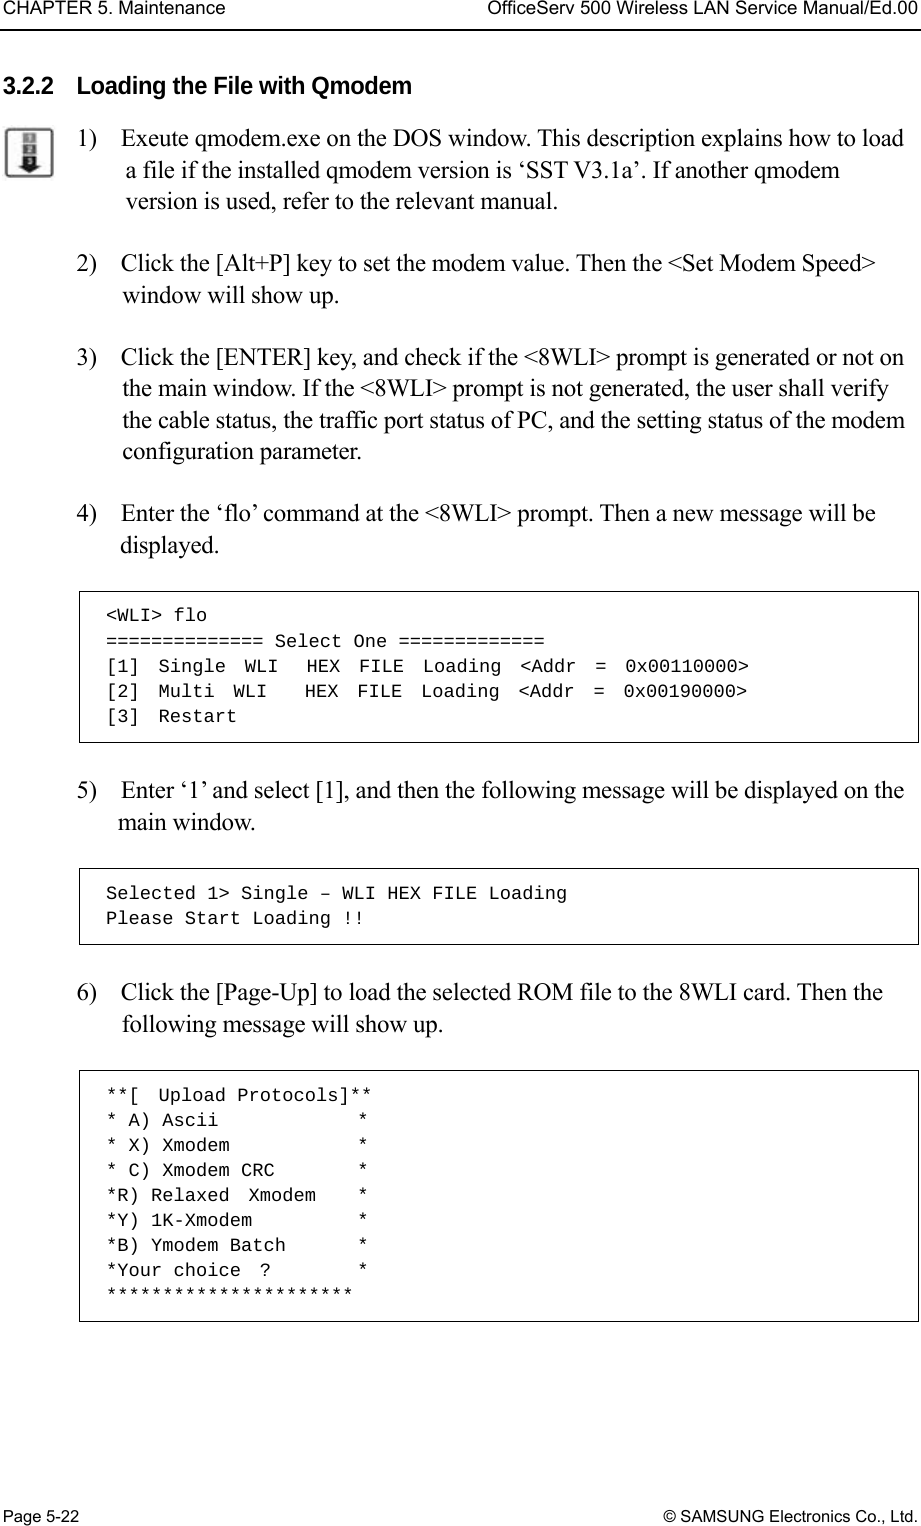 CHAPTER 5. Maintenance  OfficeServ 500 Wireless LAN Service Manual/Ed.00 Page 5-22 © SAMSUNG Electronics Co., Ltd. 3.2.2  Loading the File with Qmodem 1)    Exeute qmodem.exe on the DOS window. This description explains how to load a file if the installed qmodem version is ‘SST V3.1a’. If another qmodem version is used, refer to the relevant manual.  2)    Click the [Alt+P] key to set the modem value. Then the &lt;Set Modem Speed&gt; window will show up.    3)    Click the [ENTER] key, and check if the &lt;8WLI&gt; prompt is generated or not on the main window. If the &lt;8WLI&gt; prompt is not generated, the user shall verify the cable status, the traffic port status of PC, and the setting status of the modem configuration parameter.    4)    Enter the ‘flo’ command at the &lt;8WLI&gt; prompt. Then a new message will be displayed.   &lt;WLI&gt; flo ============== Select One ============= [1]  Single  WLI   HEX  FILE  Loading  &lt;Addr  =  0x00110000&gt; [2]  Multi  WLI    HEX  FILE  Loading  &lt;Addr  =  0x00190000&gt; [3]  Restart  5)    Enter ‘1’ and select [1], and then the following message will be displayed on the main window.    Selected 1&gt; Single – WLI HEX FILE Loading Please Start Loading !!  6)    Click the [Page-Up] to load the selected ROM file to the 8WLI card. Then the following message will show up.    **[  Upload Protocols]** * A) Ascii              * * X) Xmodem           * * C) Xmodem CRC       * *R) Relaxed  Xmodem   * *Y) 1K-Xmodem         * *B) Ymodem Batch       * *Your choice  ?         * **********************  